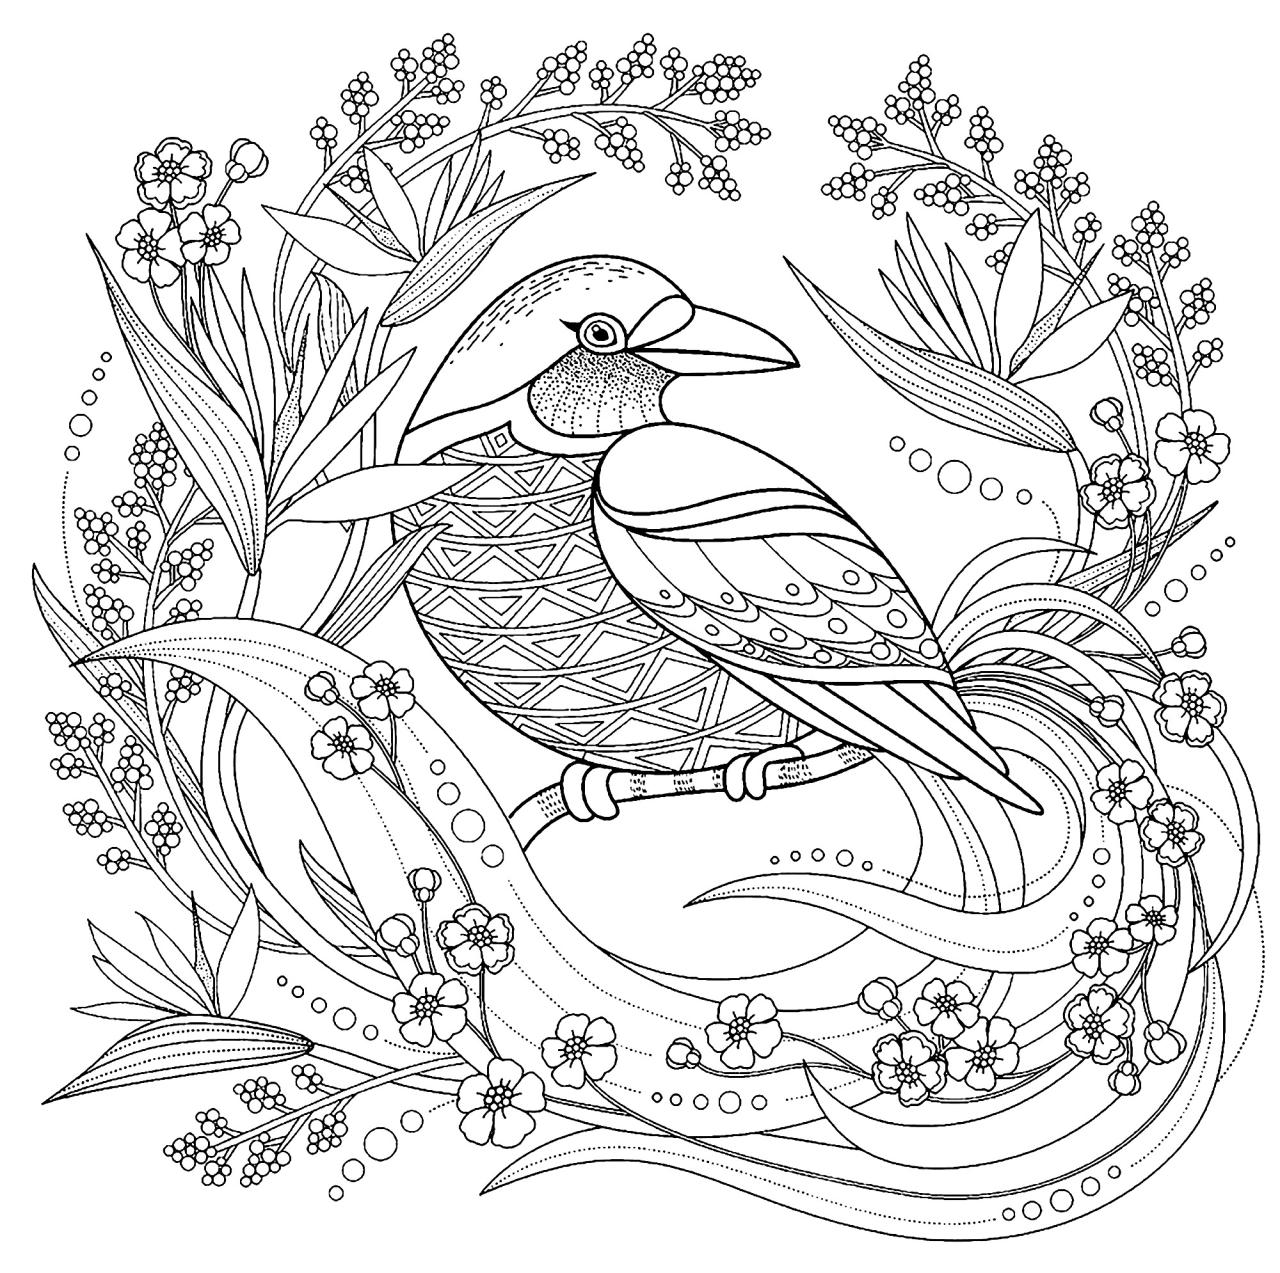 Coloring Page Of Bird